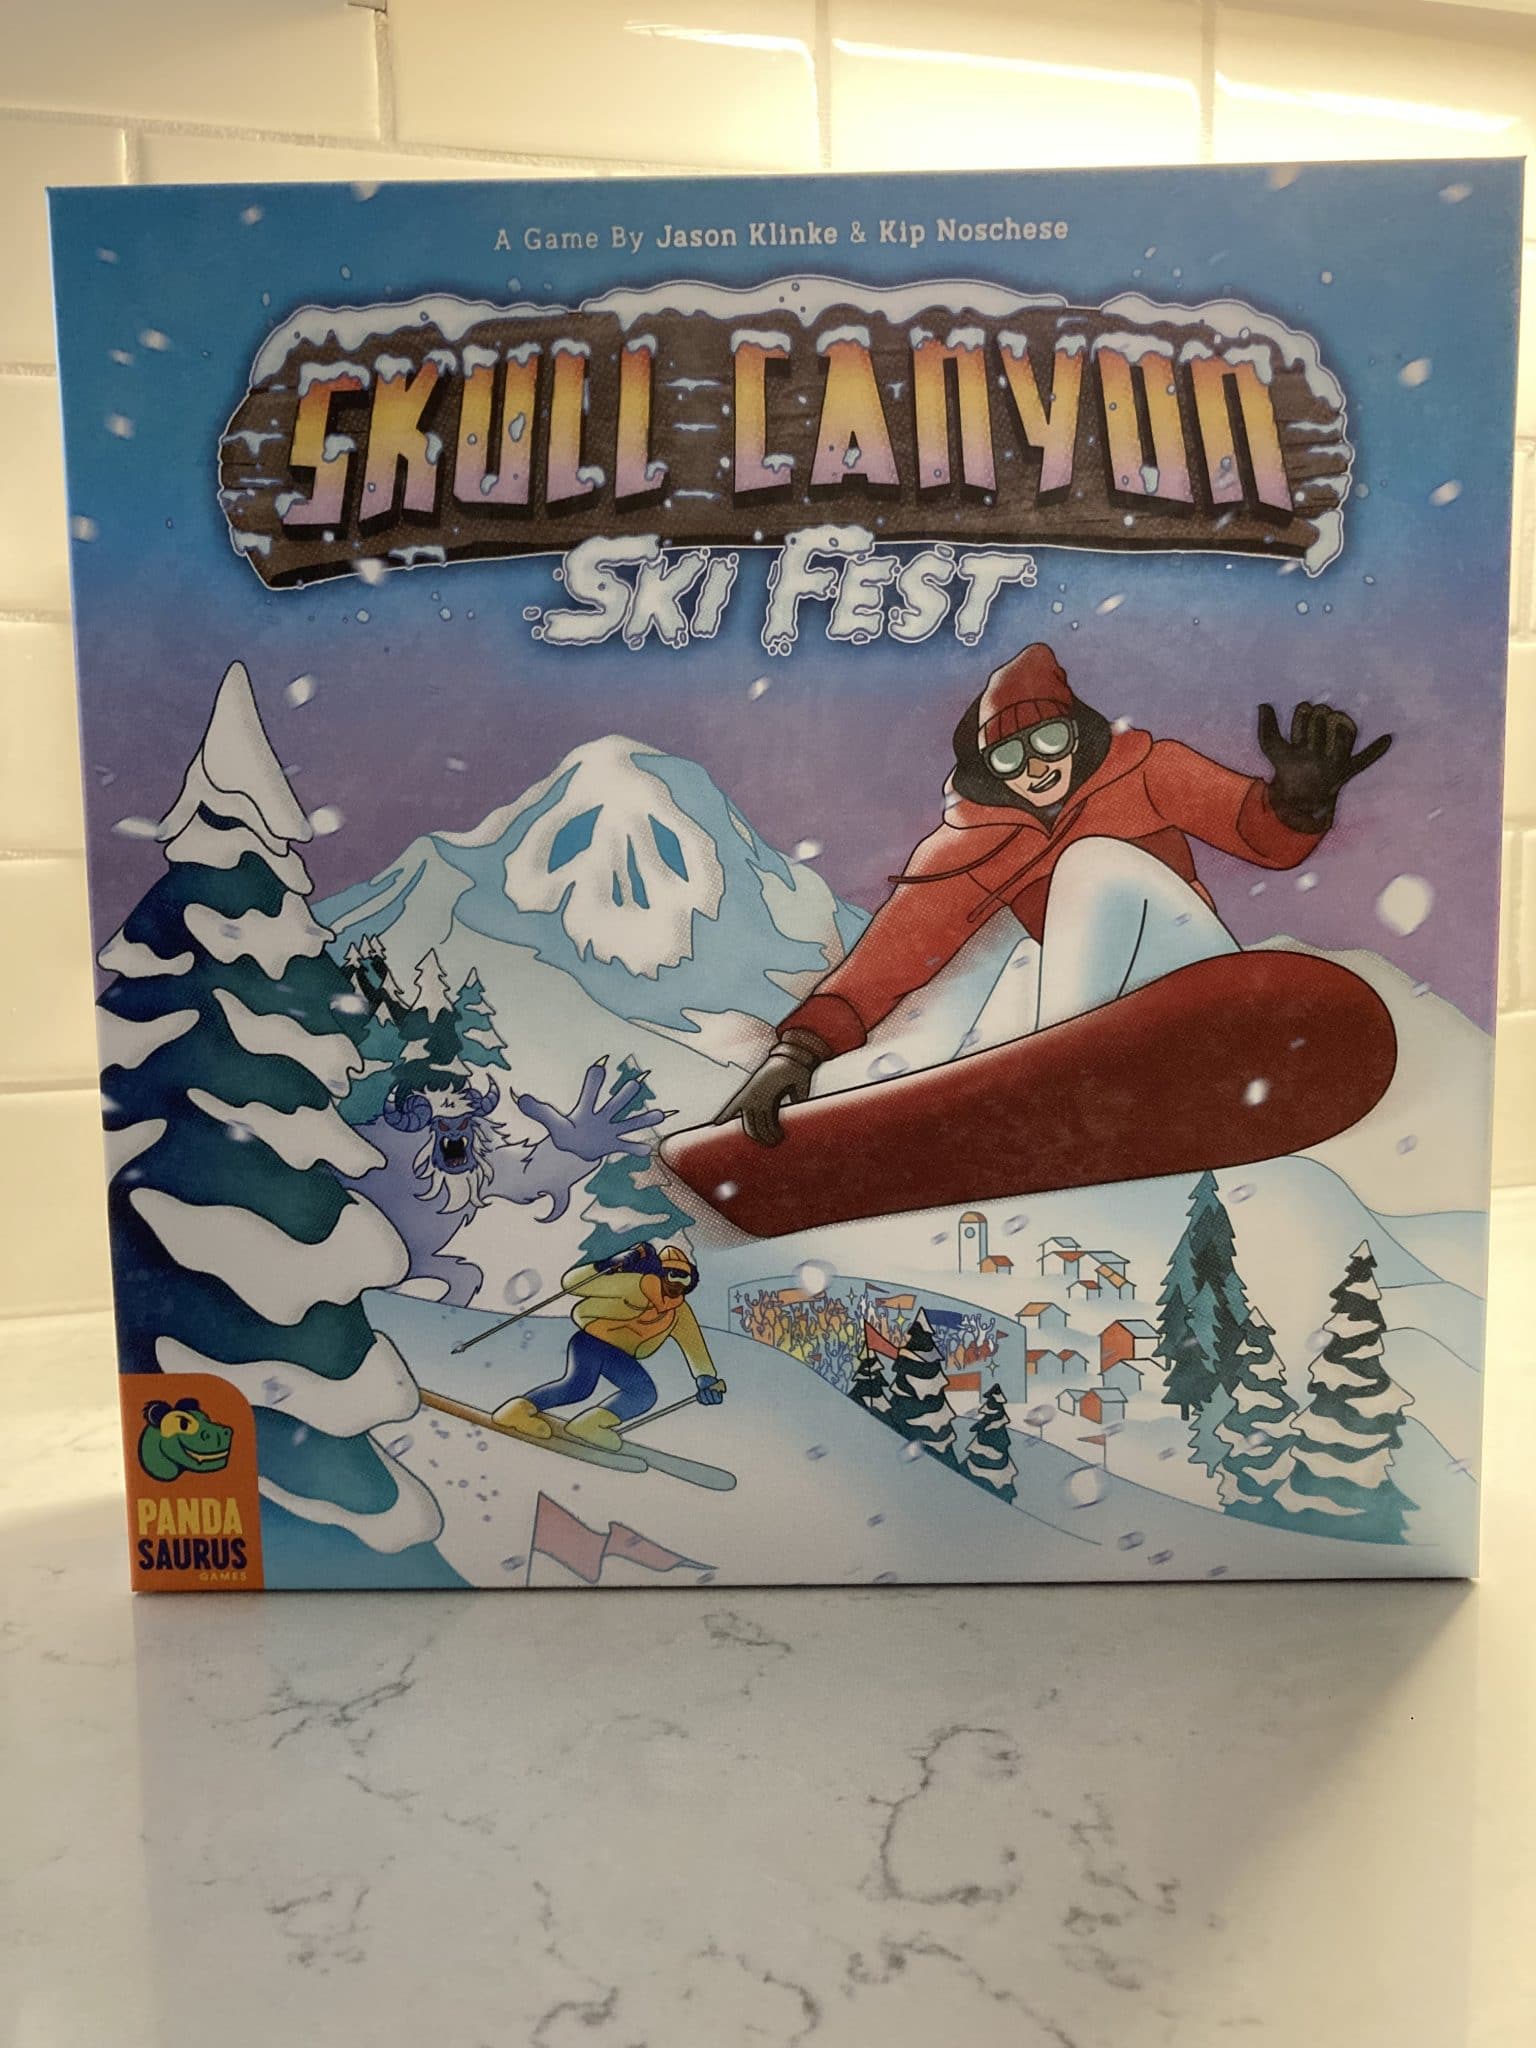 morbiditet sandhed øve sig Board Game Review: Shred the Slopes with Skull Canyon: Ski Fest by  Pandasaurus Games! – Nerds on Earth